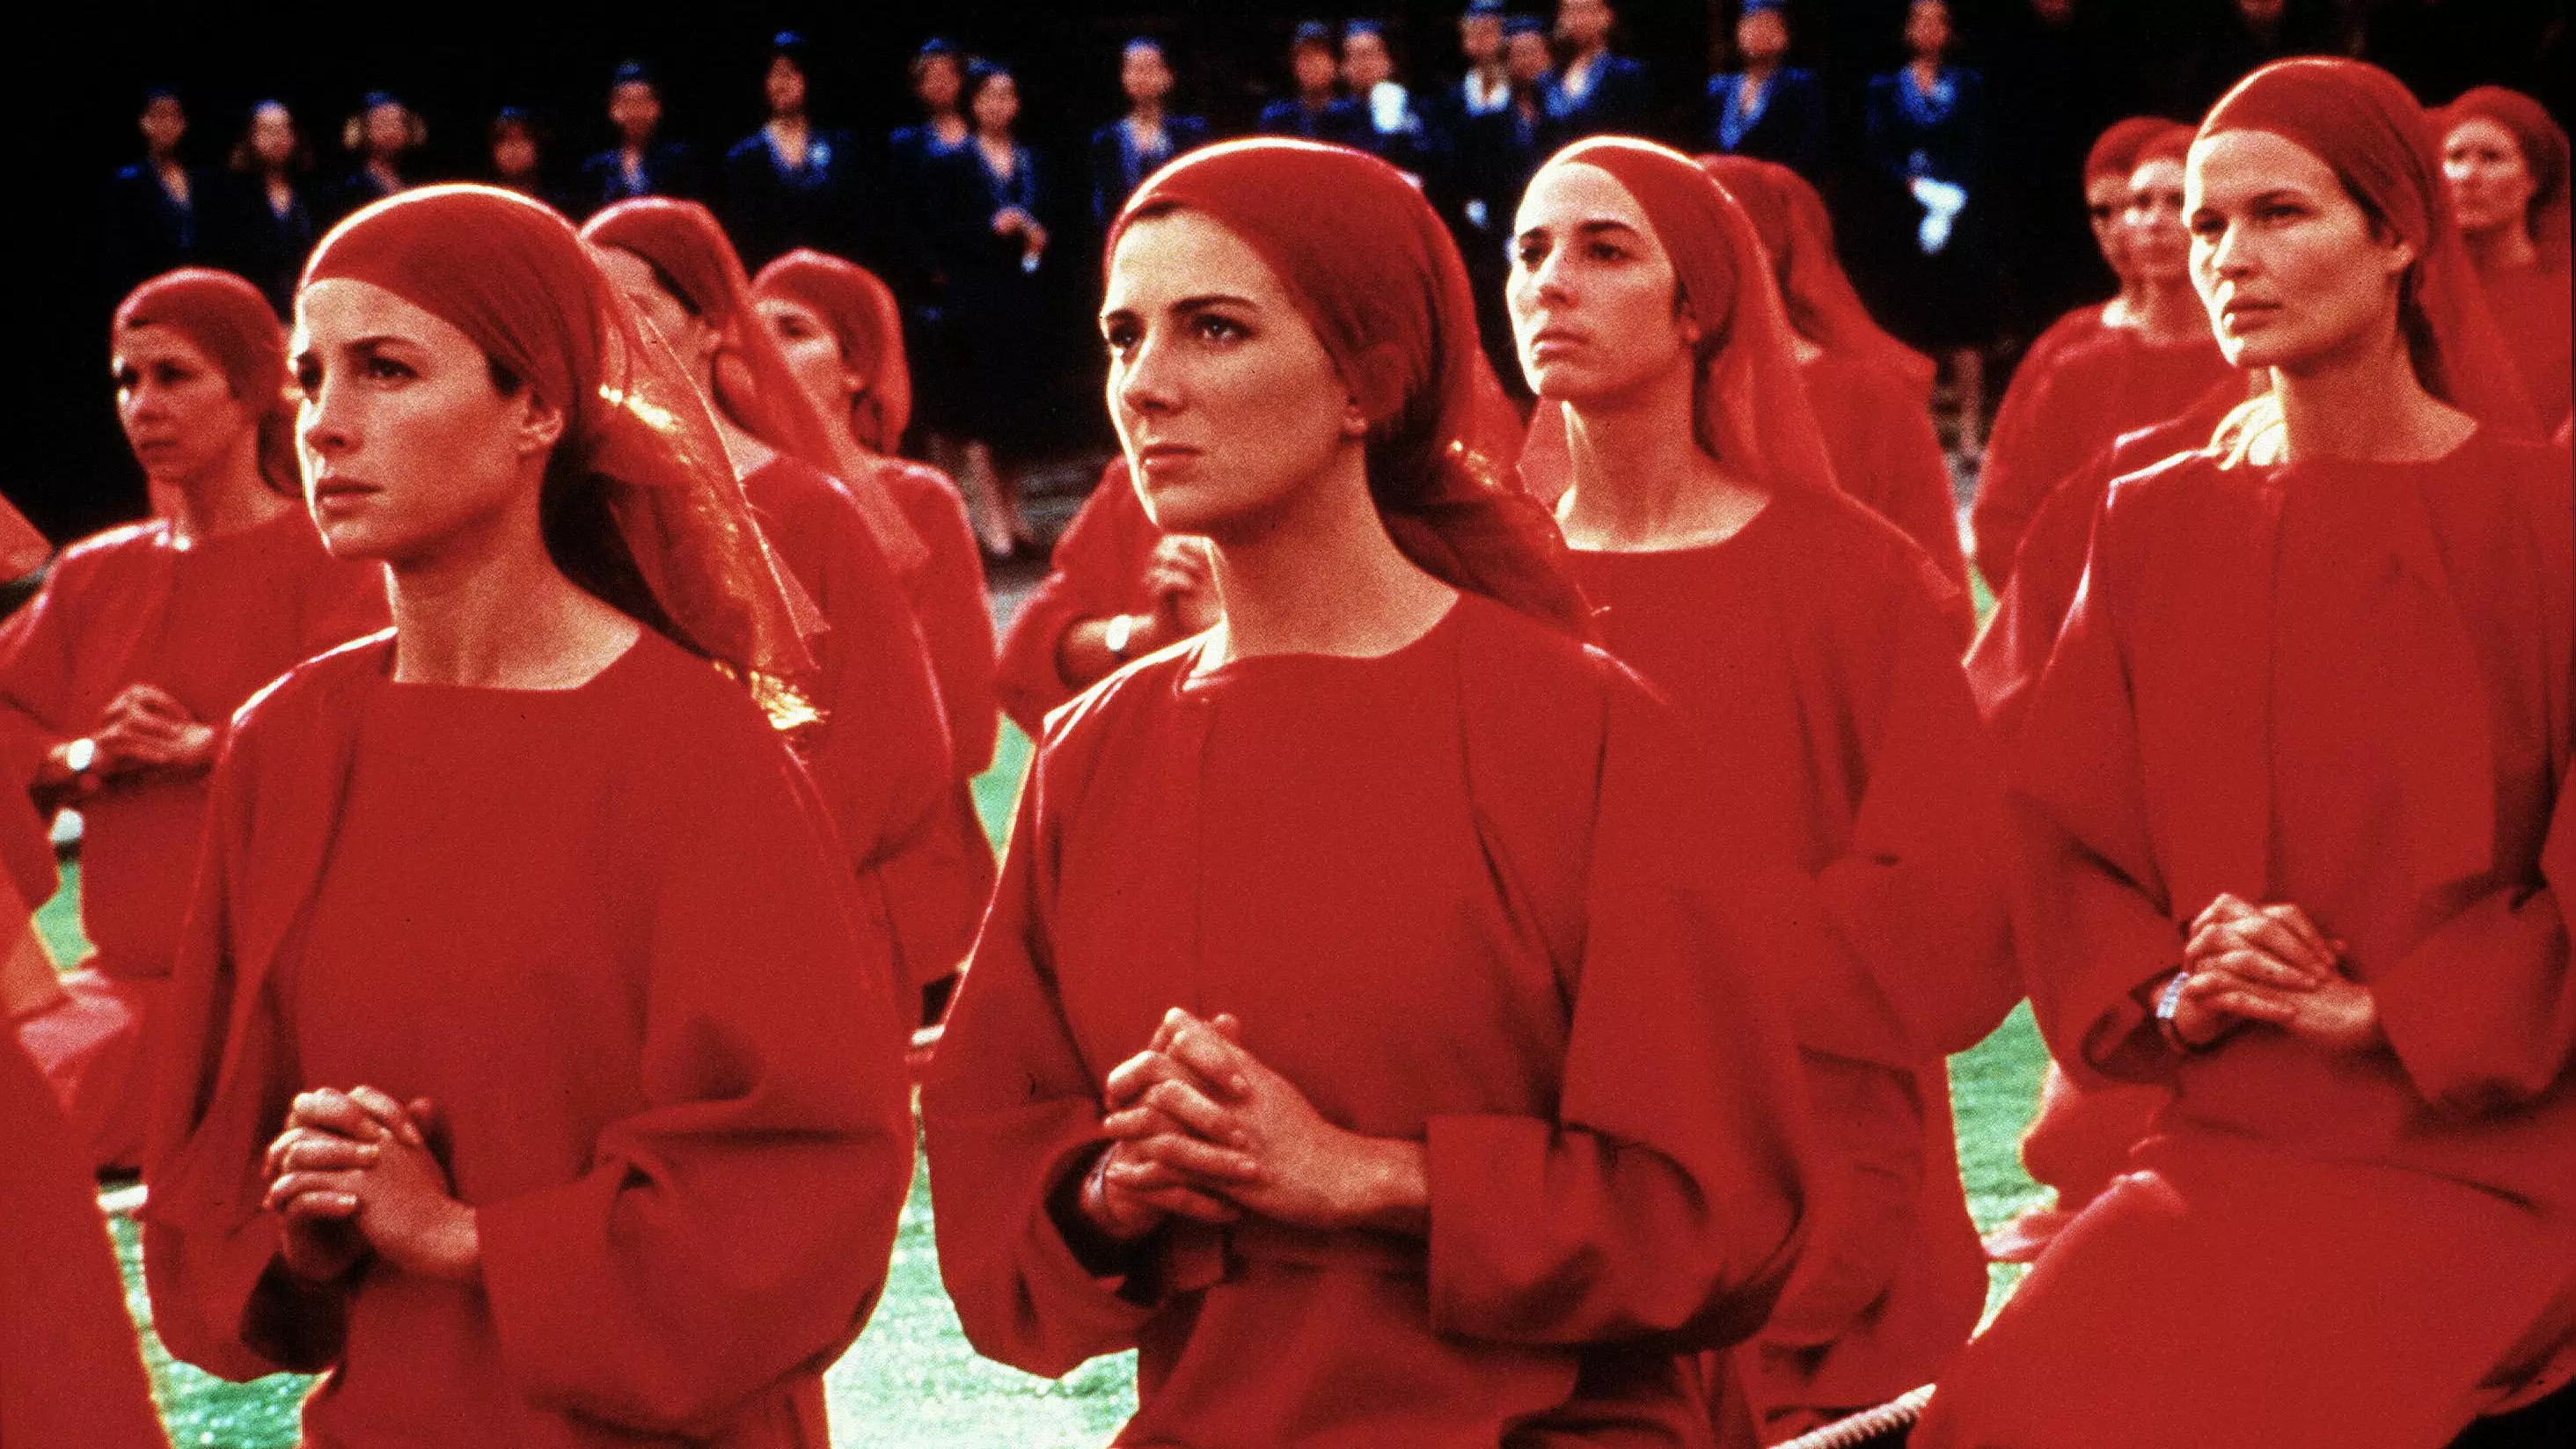 People Are Only Just Discovering The 1990 Version Of The Handmaid's Tale